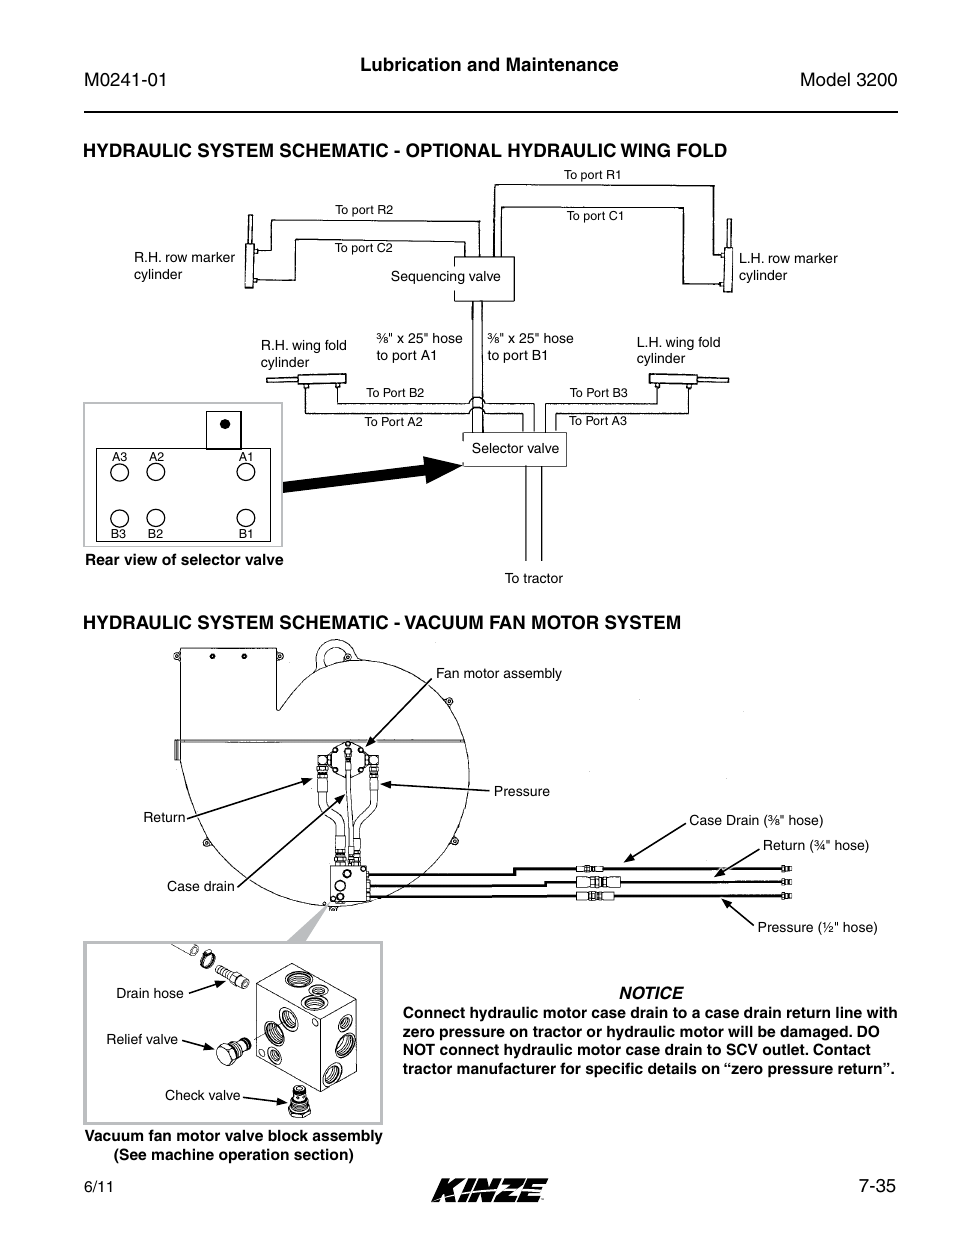 35 lubrication and maintenance | Kinze 3200 Wing-Fold Planter Rev. 7/14 User Manual | Page 175 / 192